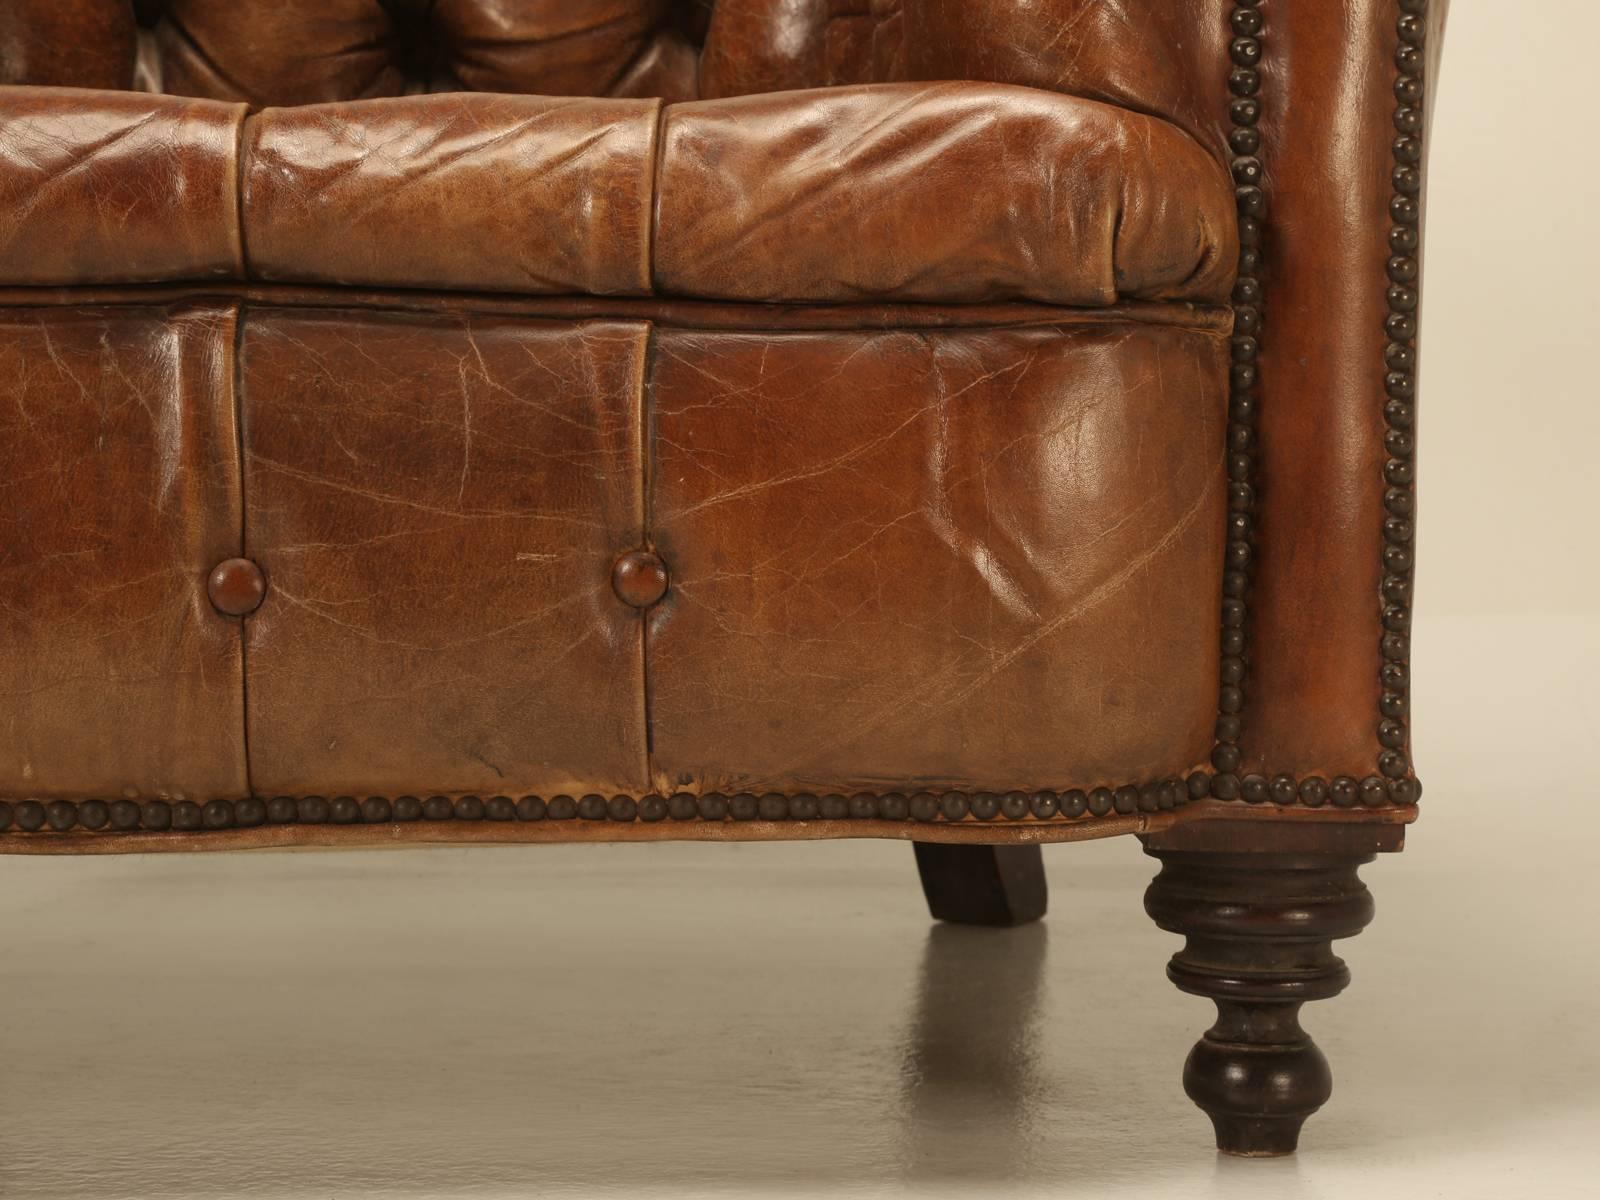 Hand-Crafted Antique Chesterfield Chair in Original Leather and Horsehair Stuffing circa 1900